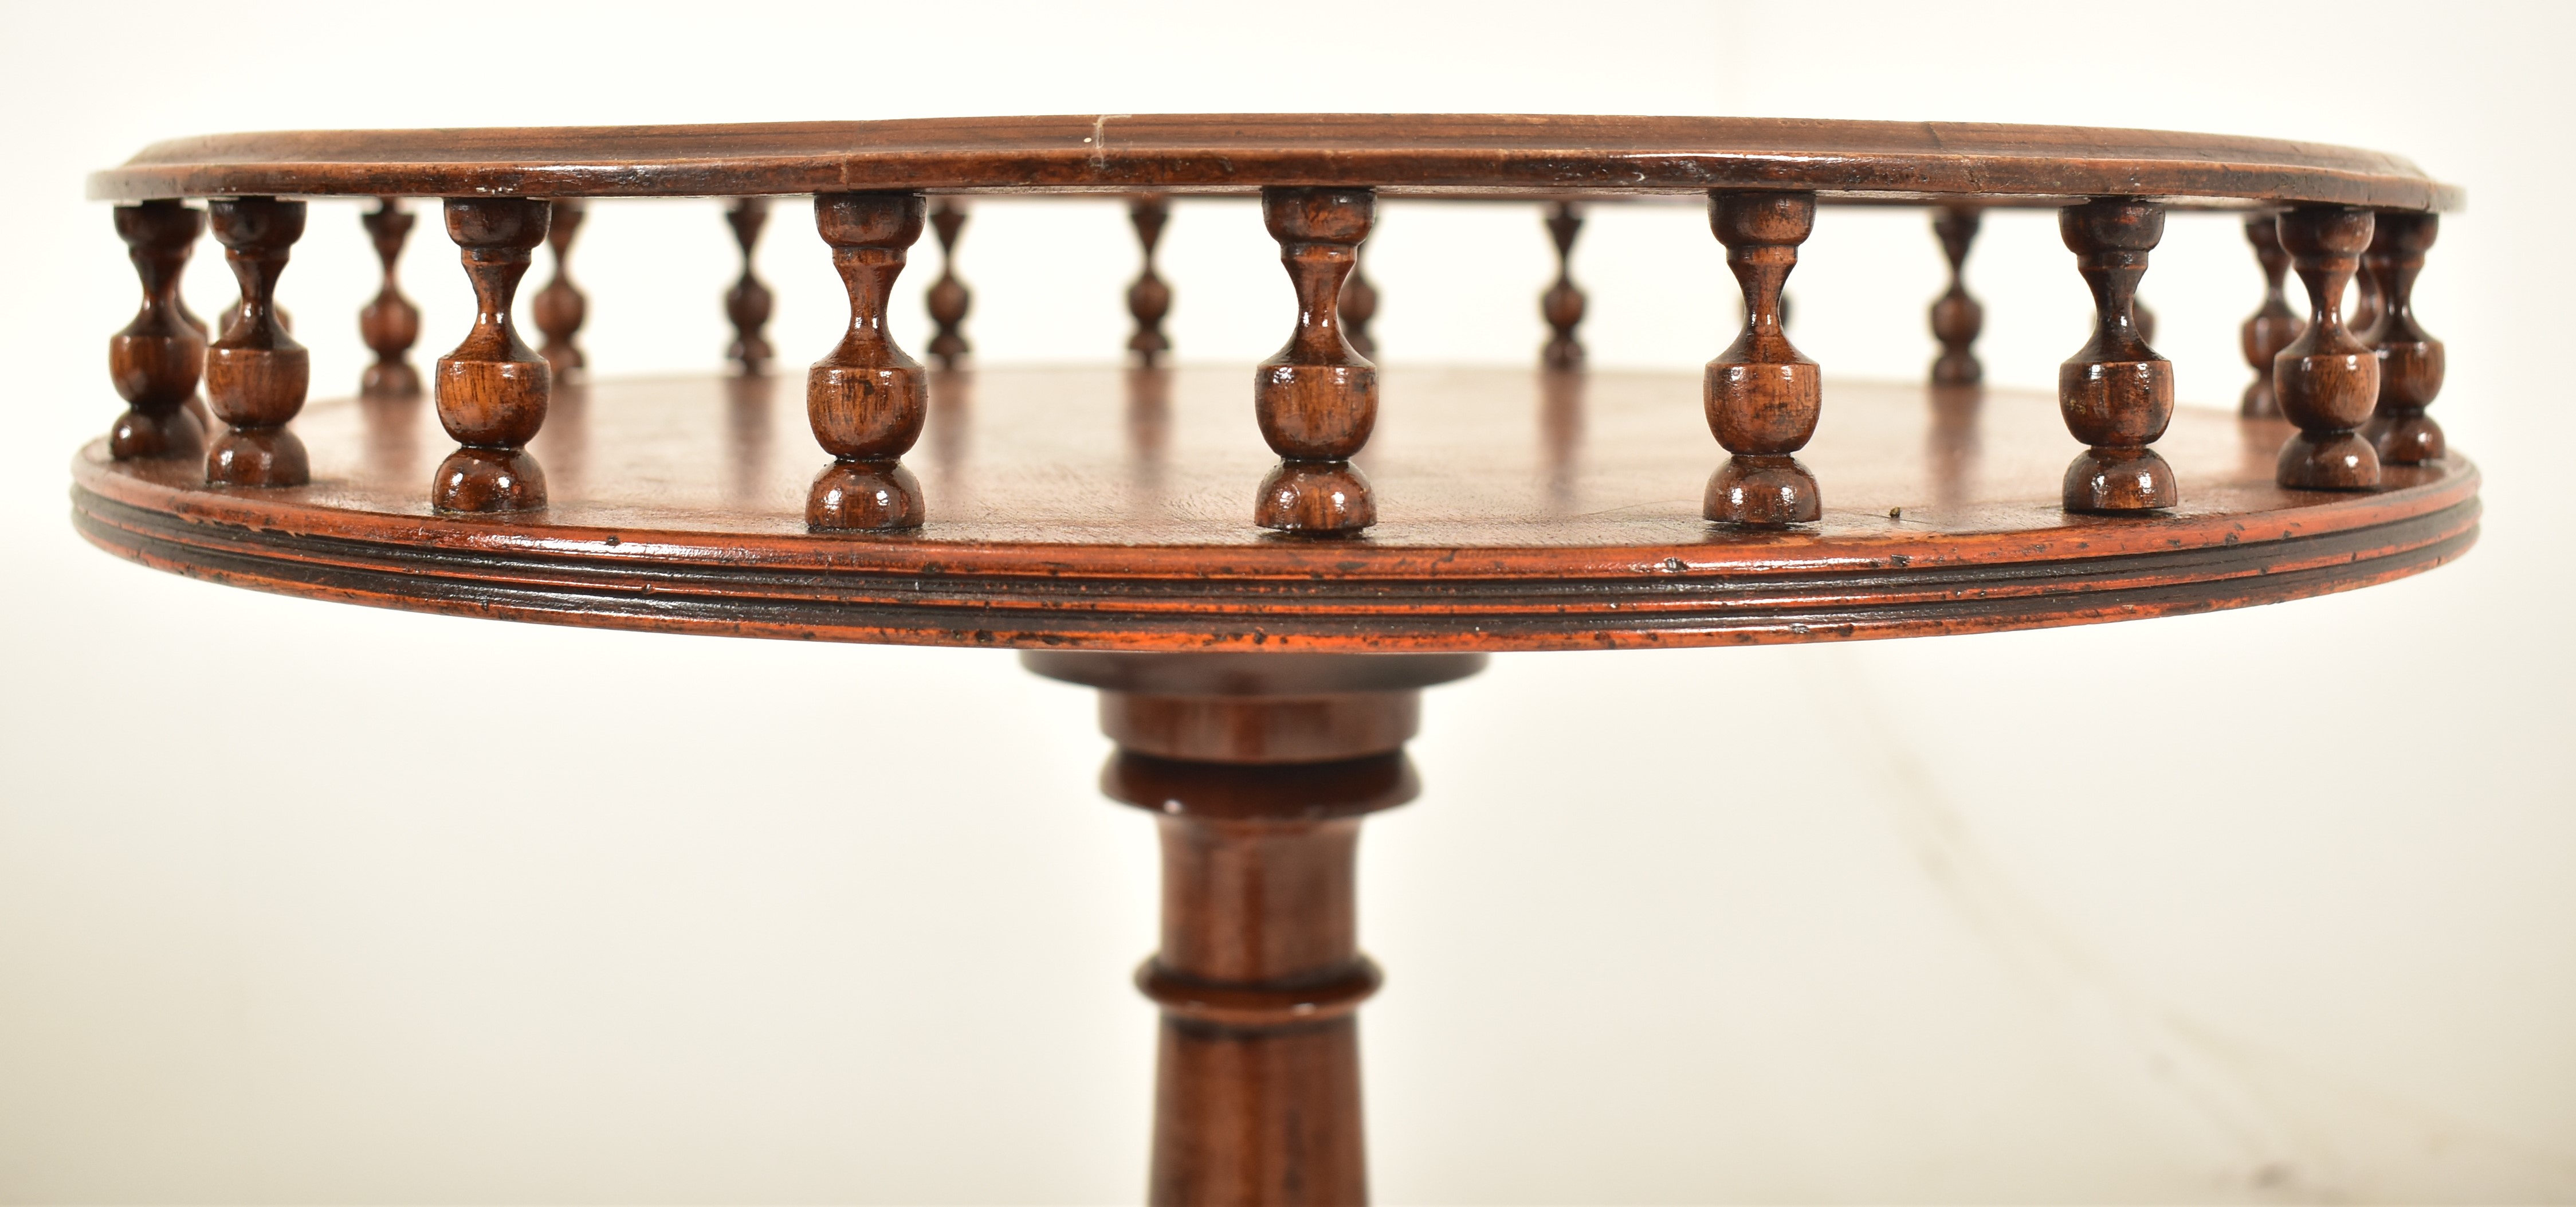 MATCHED PAIR OF REGENCY REVIVAL WINE TRIPOD TABLES - Image 6 of 7